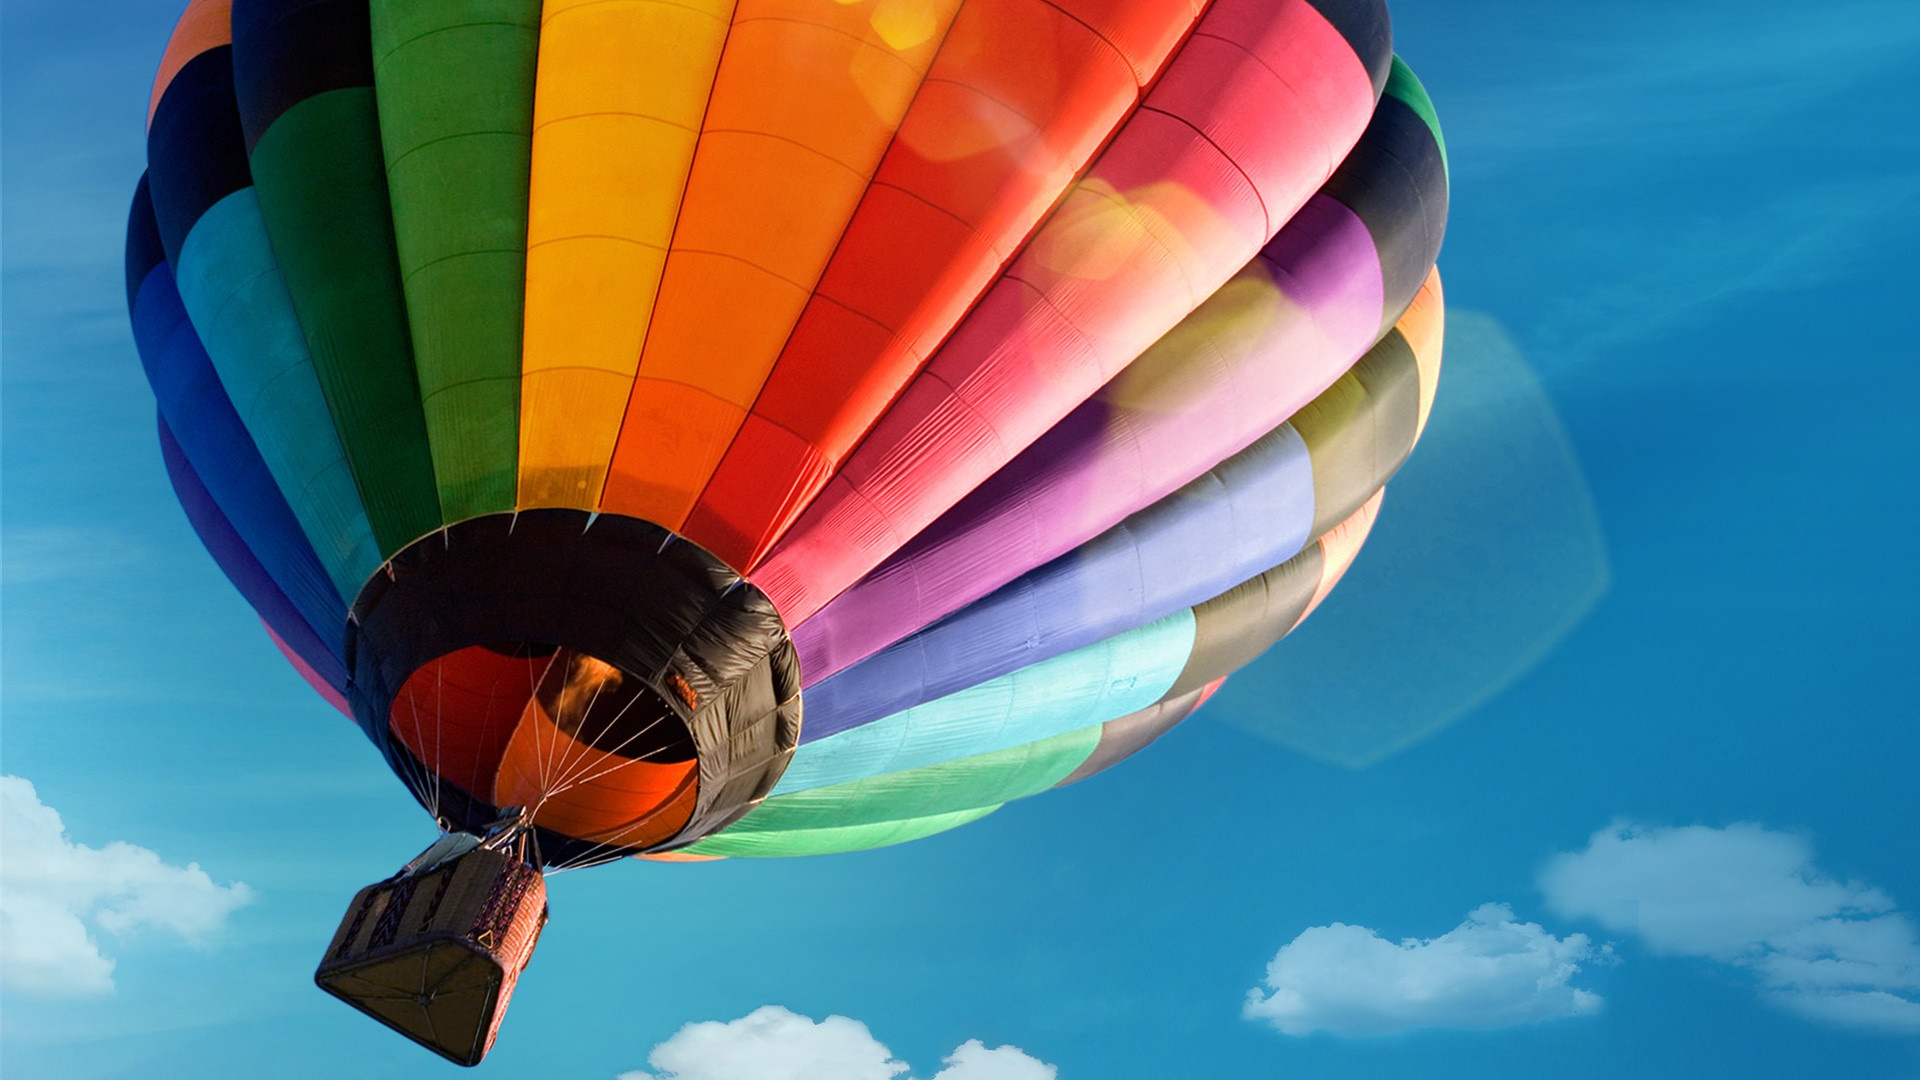 Green Yellow and Red Hot Air Balloon. Wallpaper in 1920x1080 Resolution